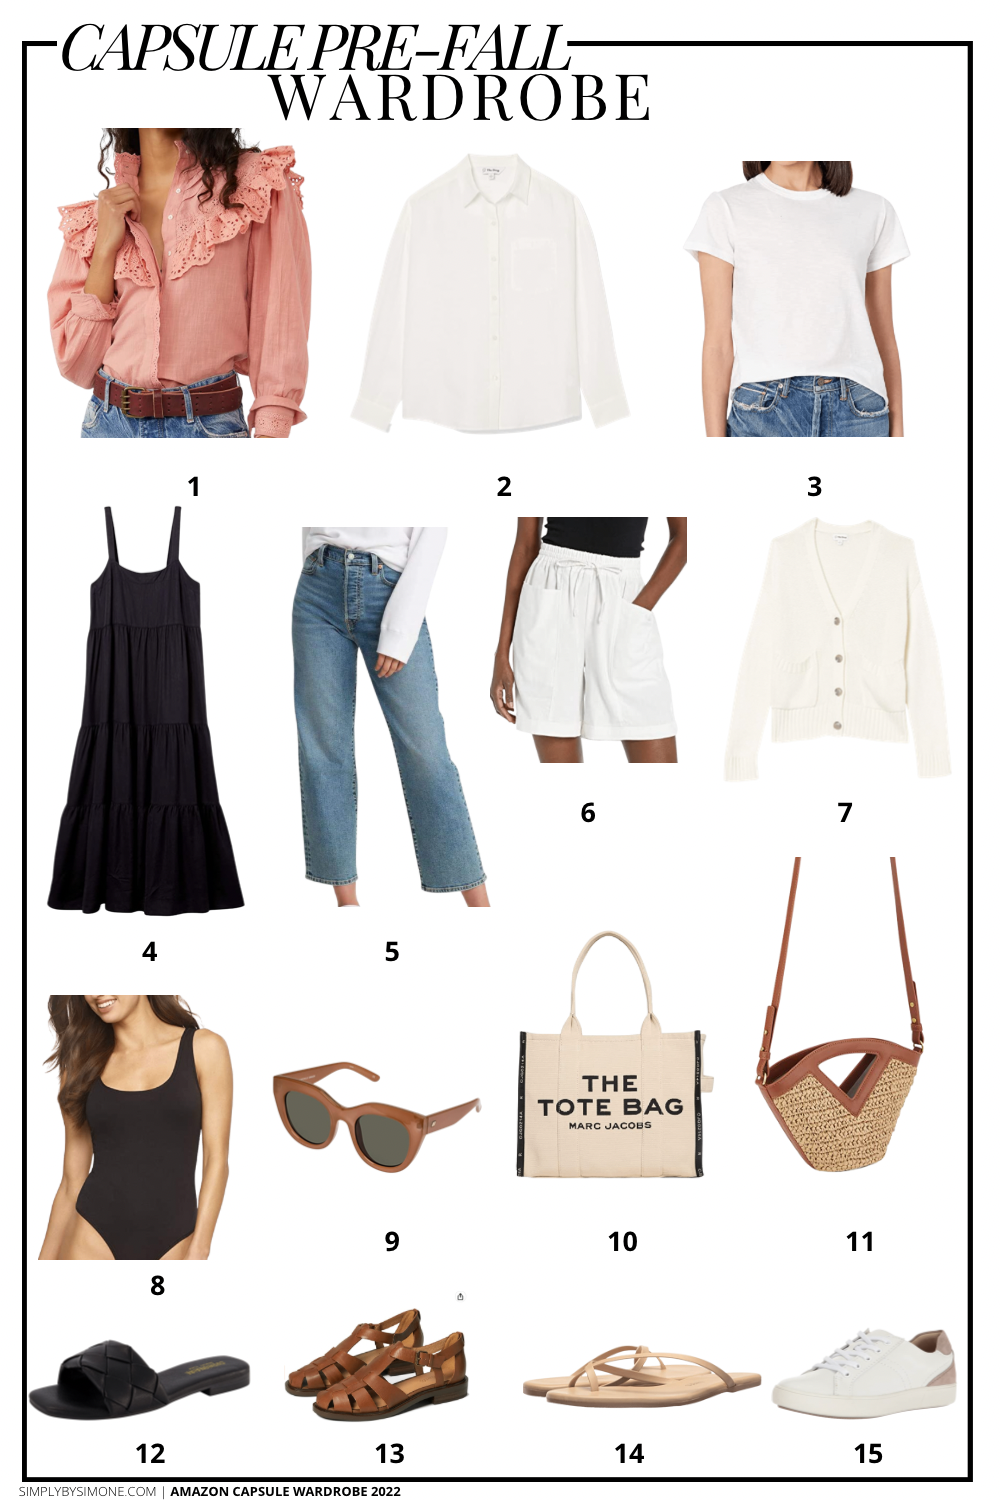 Affordable Amazon Pre-Fall Capsule Wardrobe | 15 Pieces, 48 Outfits | How to Build a Capsule Wardrobe | Amazon Fall Clothes | Outfit Inspiration | 48 Pre-Fall Weather Outfit Ideas | Fall Vacation Packing Guide | Amazon Pre-Fall Capsule Wardrobe - What To Wear This Fall 2022 | Parisian Outfit Ideas | Items 1-15 | Simply by Simone